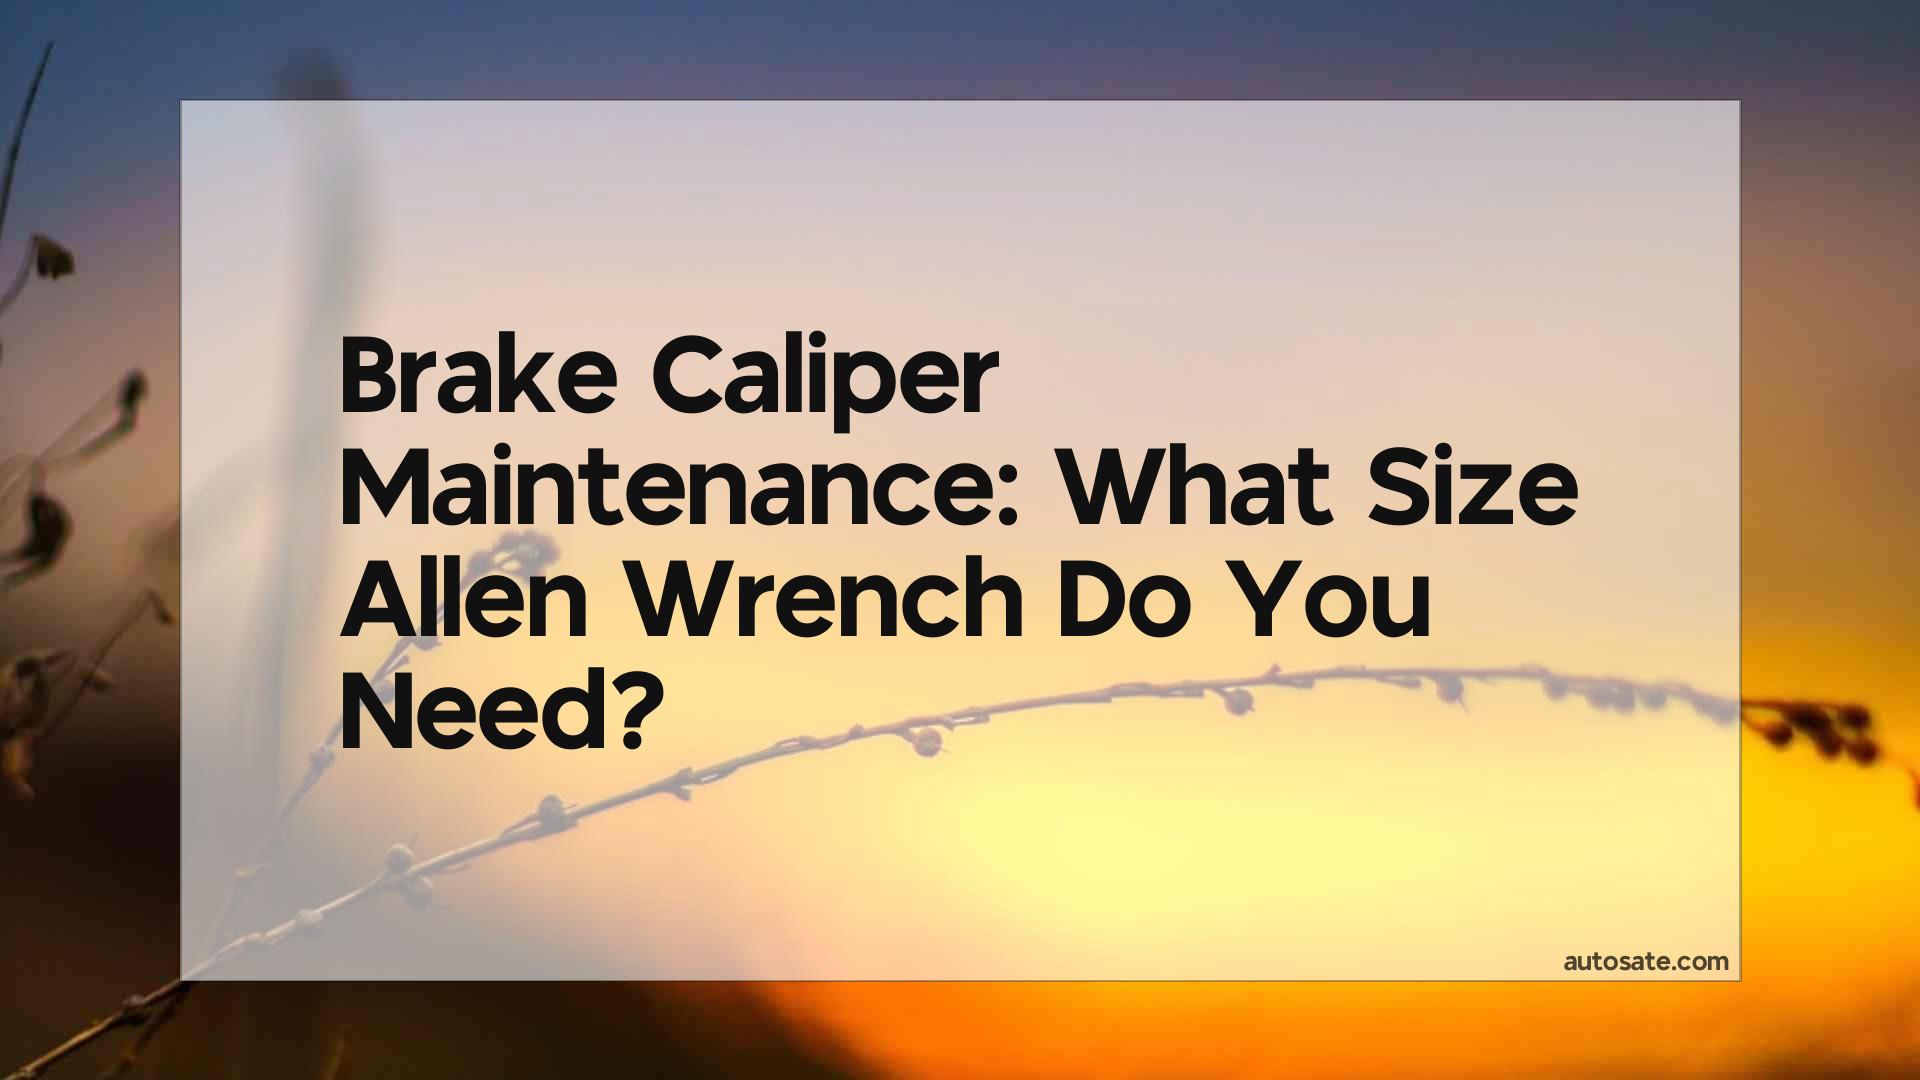 Brake Caliper Maintenance: What Size Allen Wrench Do You Need?